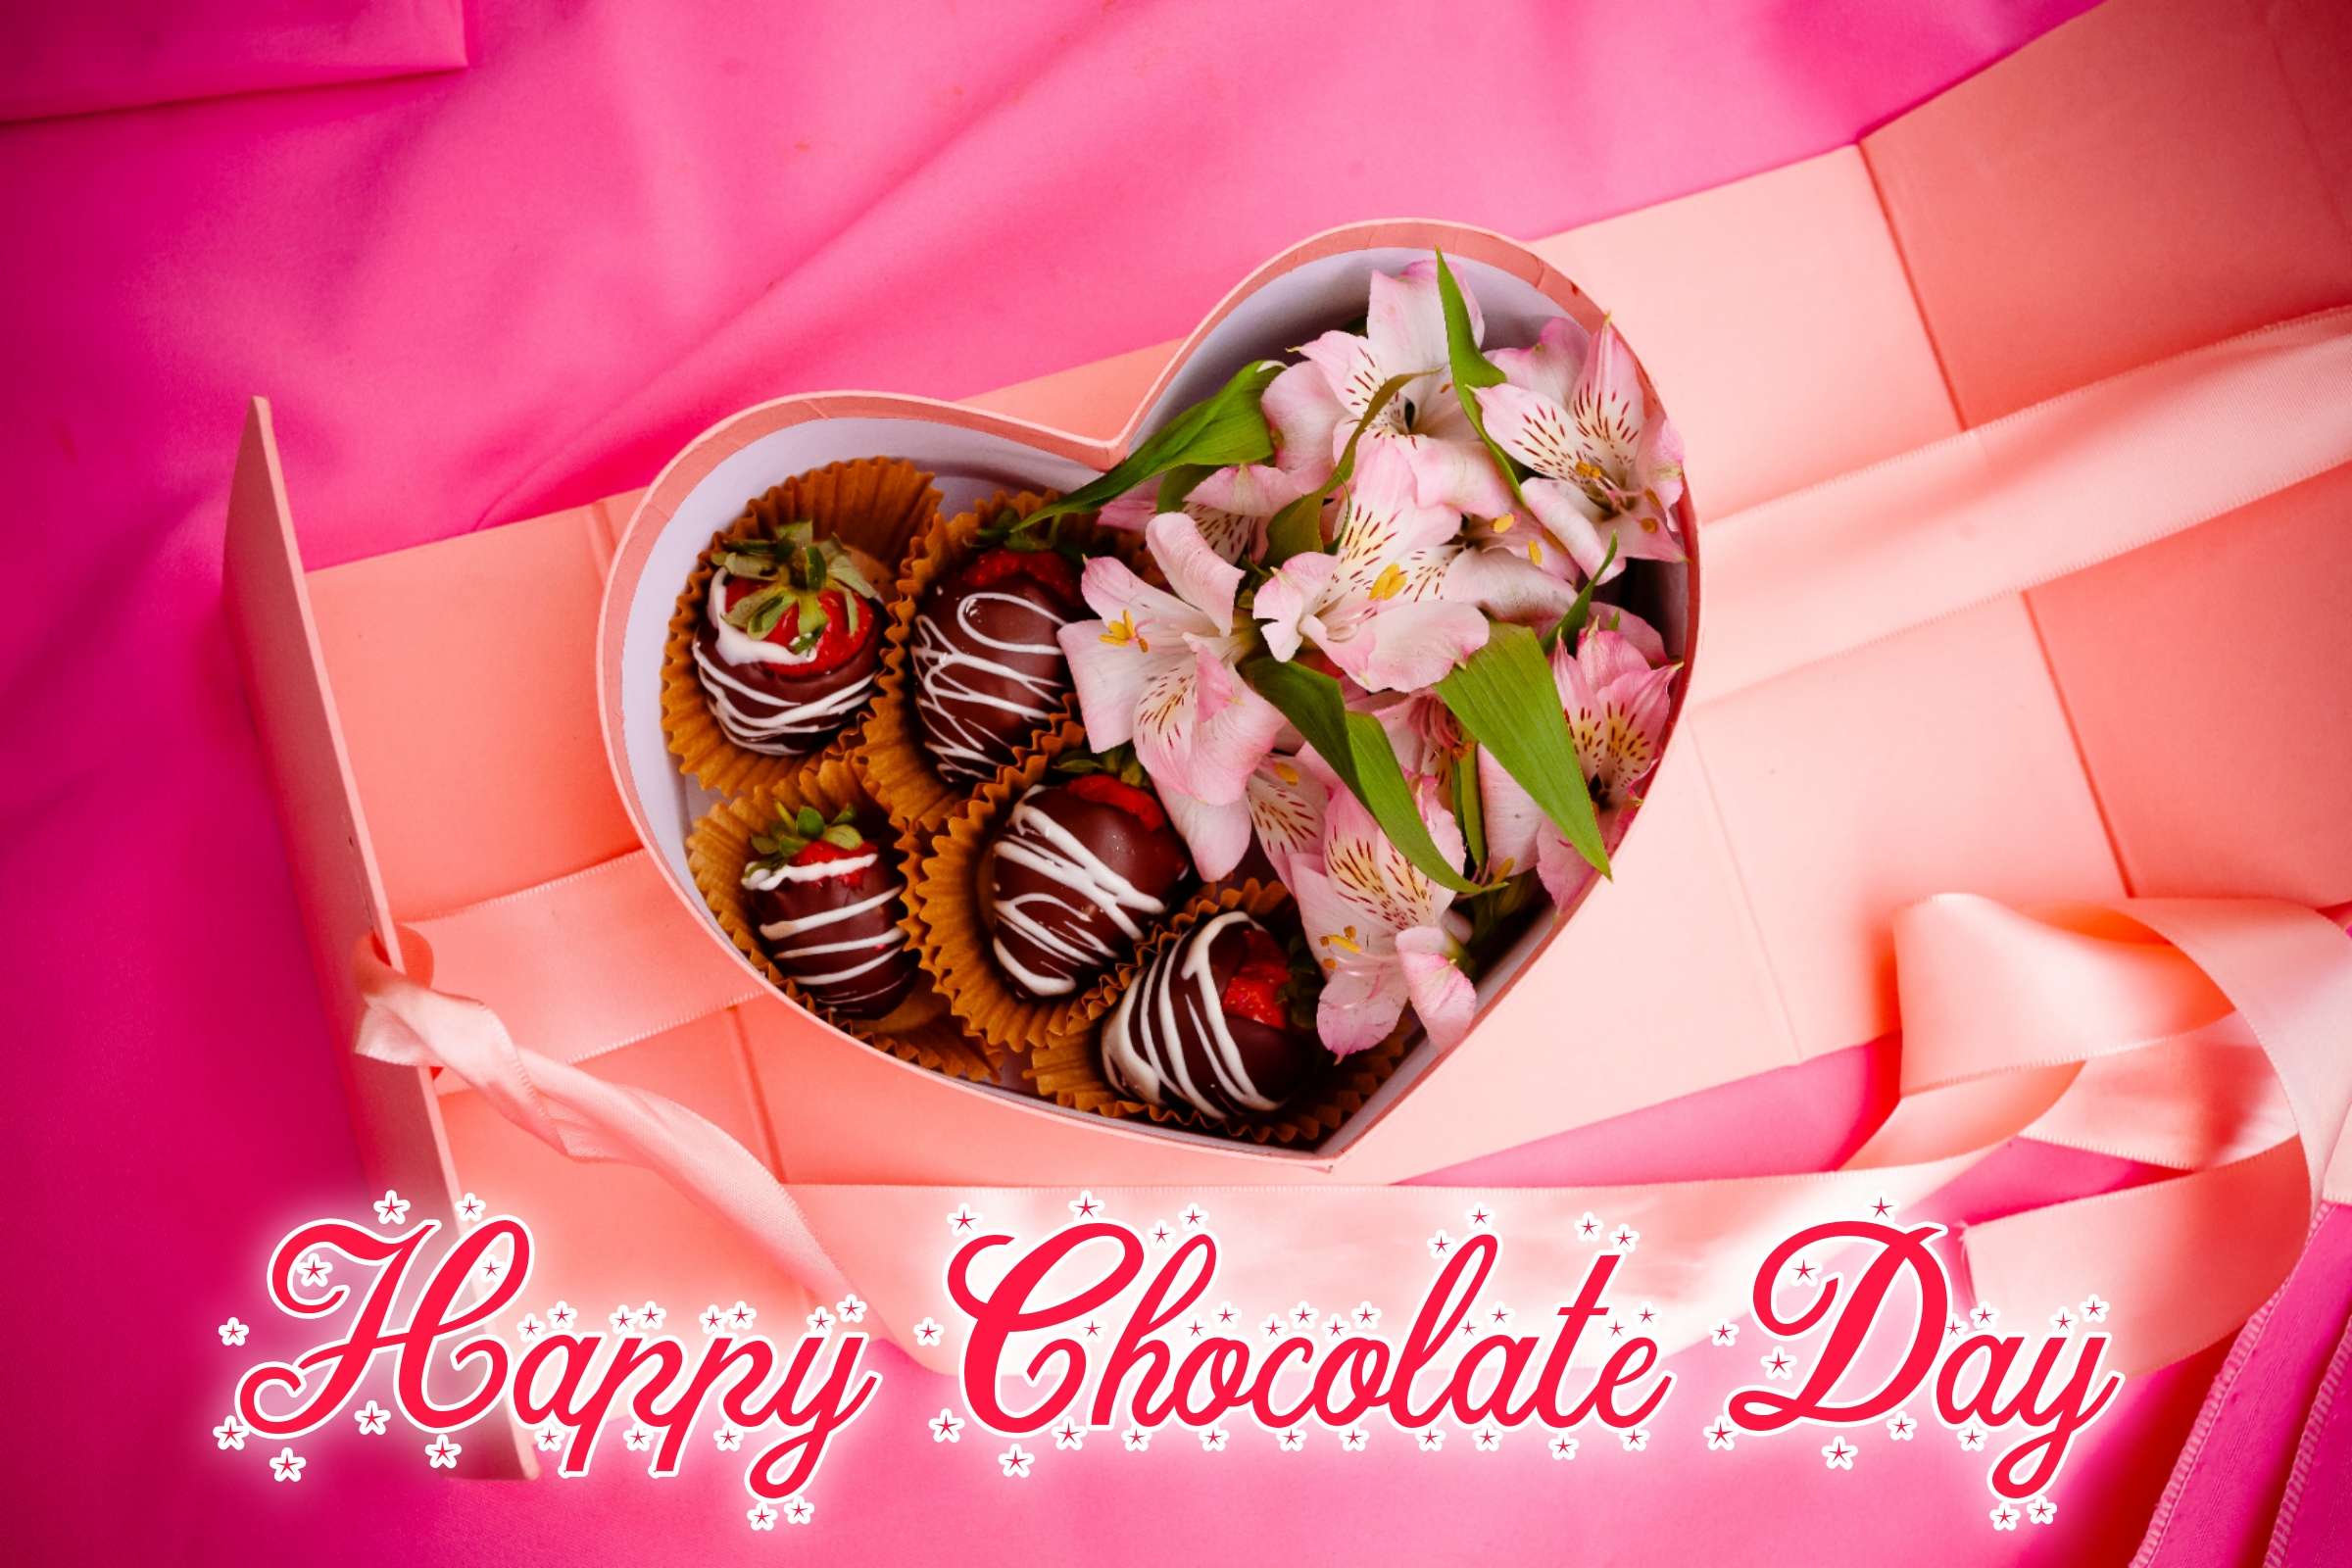 Love Romantic Chocolate Day Images Download